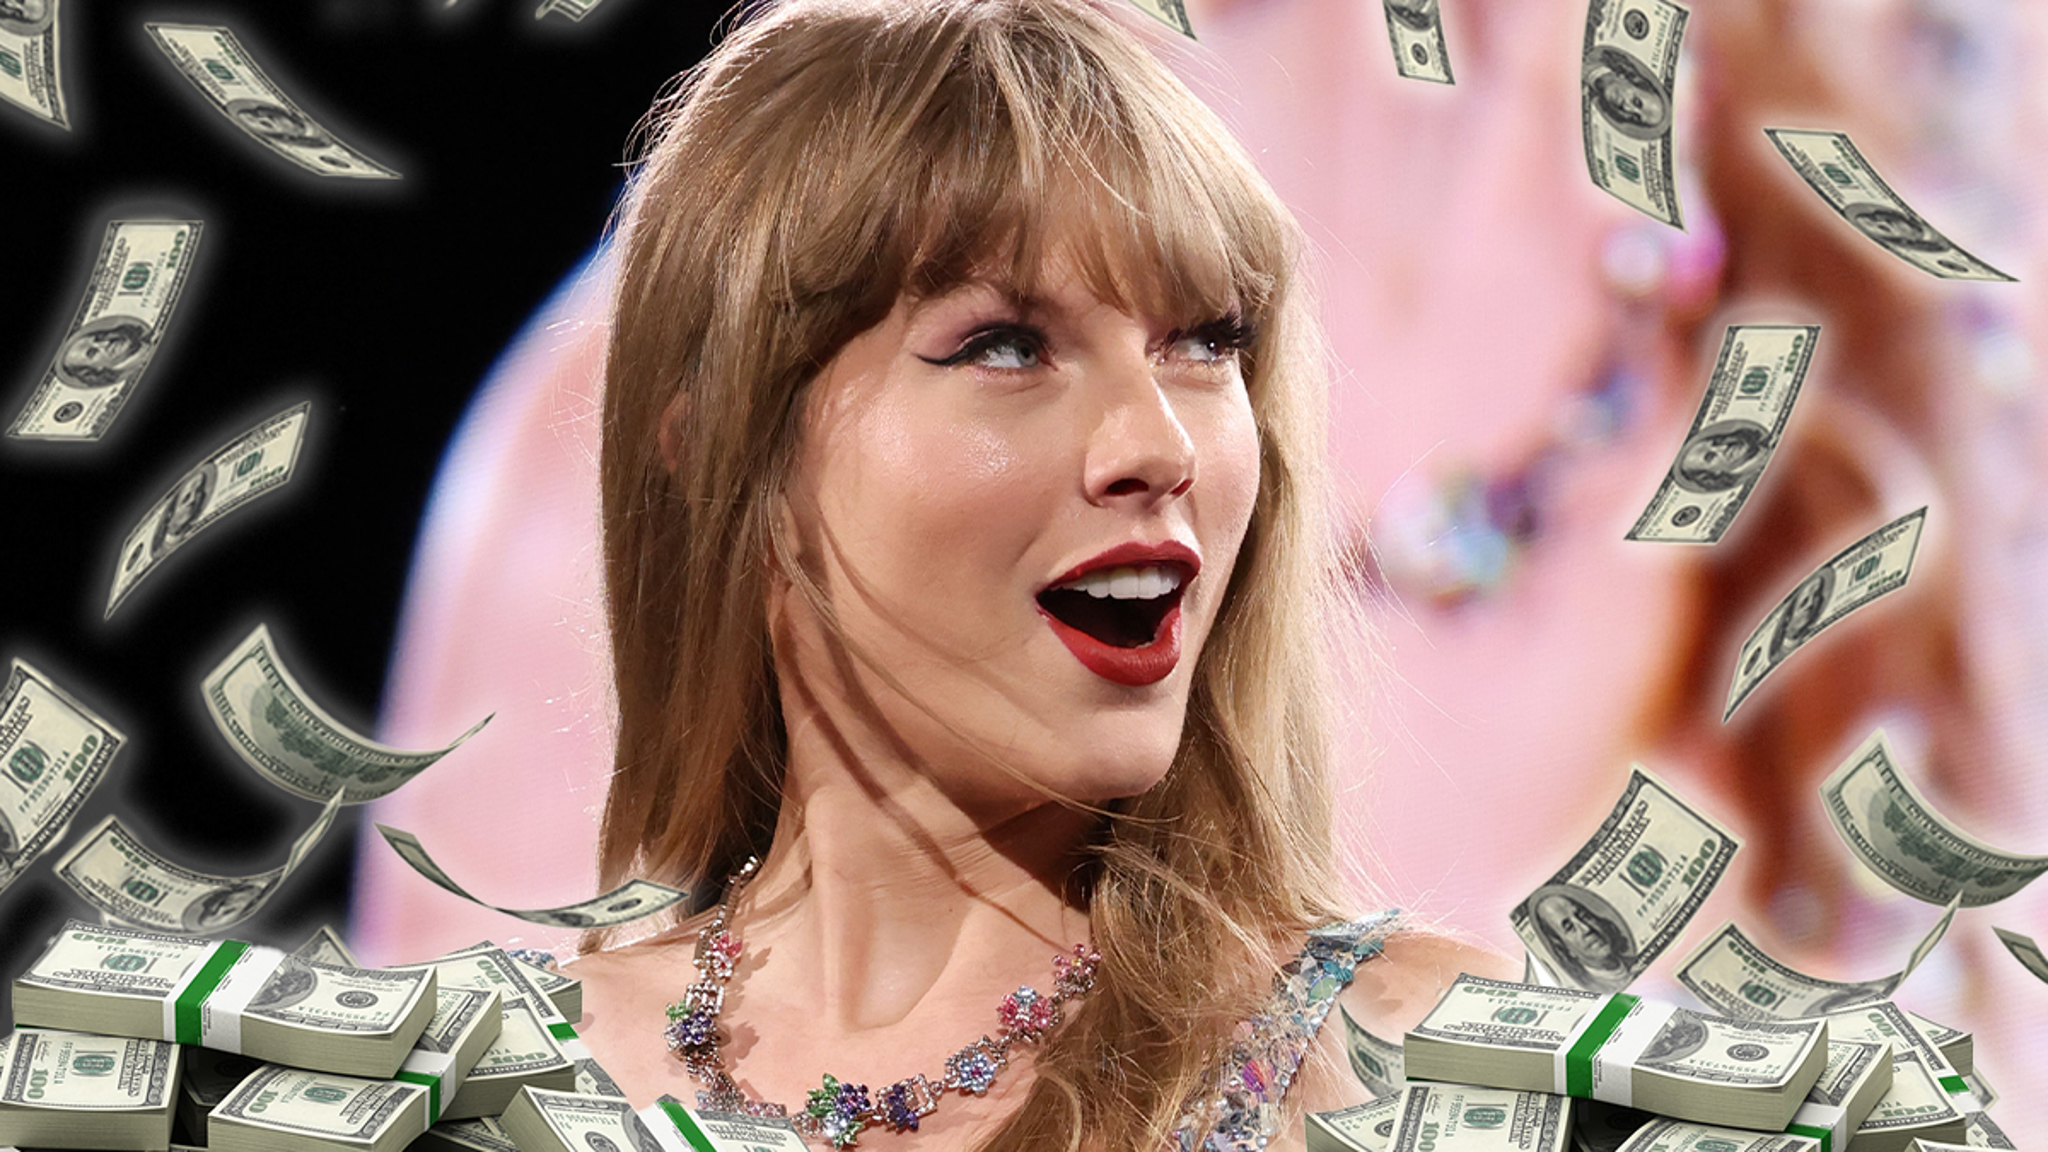 Taylor Swift named second richest woman in music by Forbes, net worth $740 million